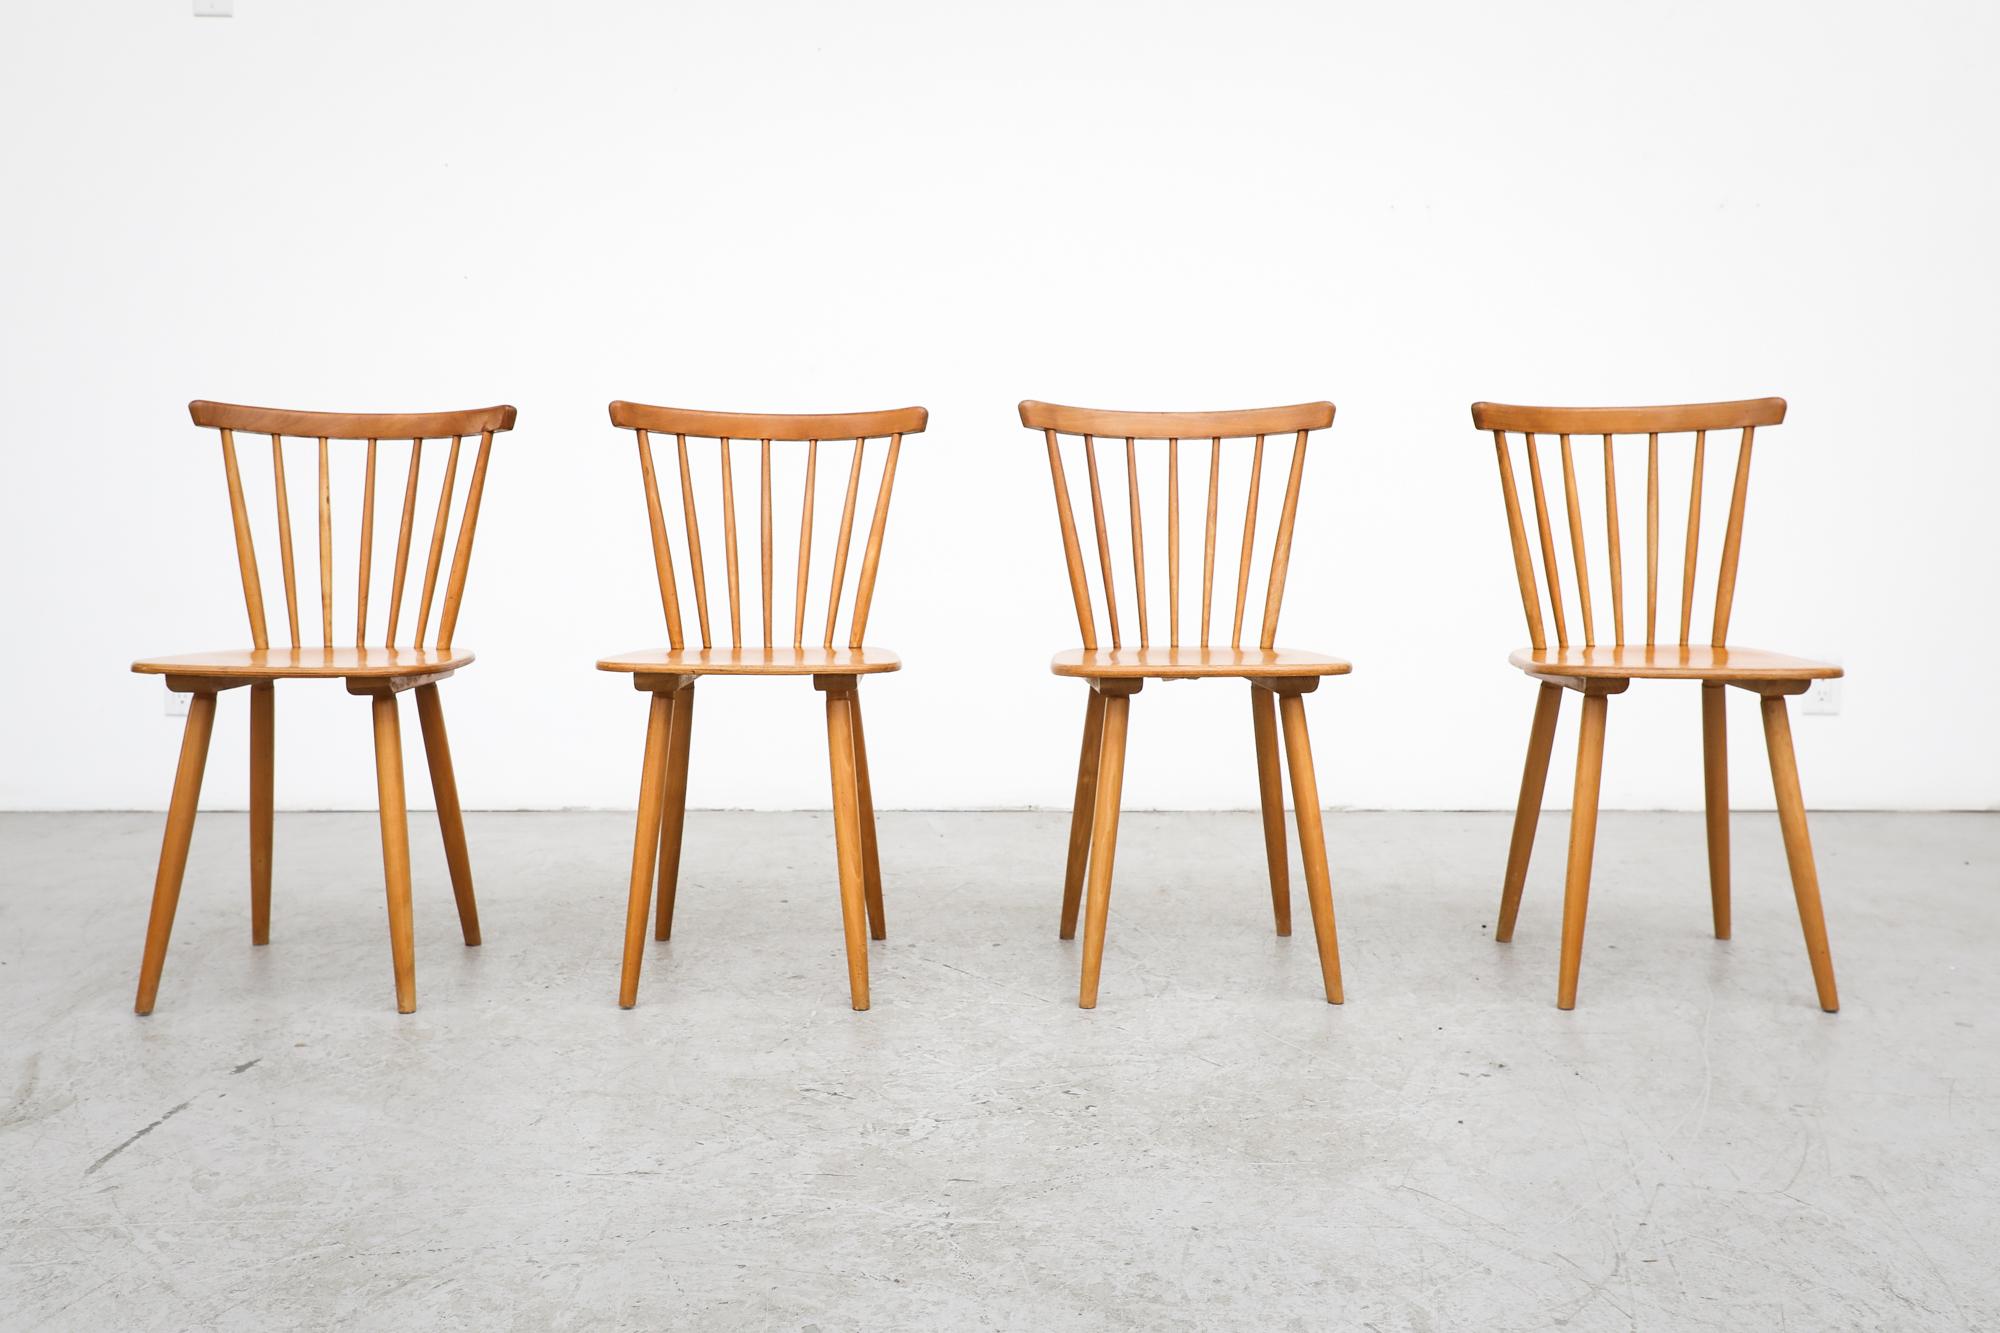 Set of 4 blonde Farstrup spindle back dining chairs. In original condition with normal wear consistent with age and use. Sold as a set.